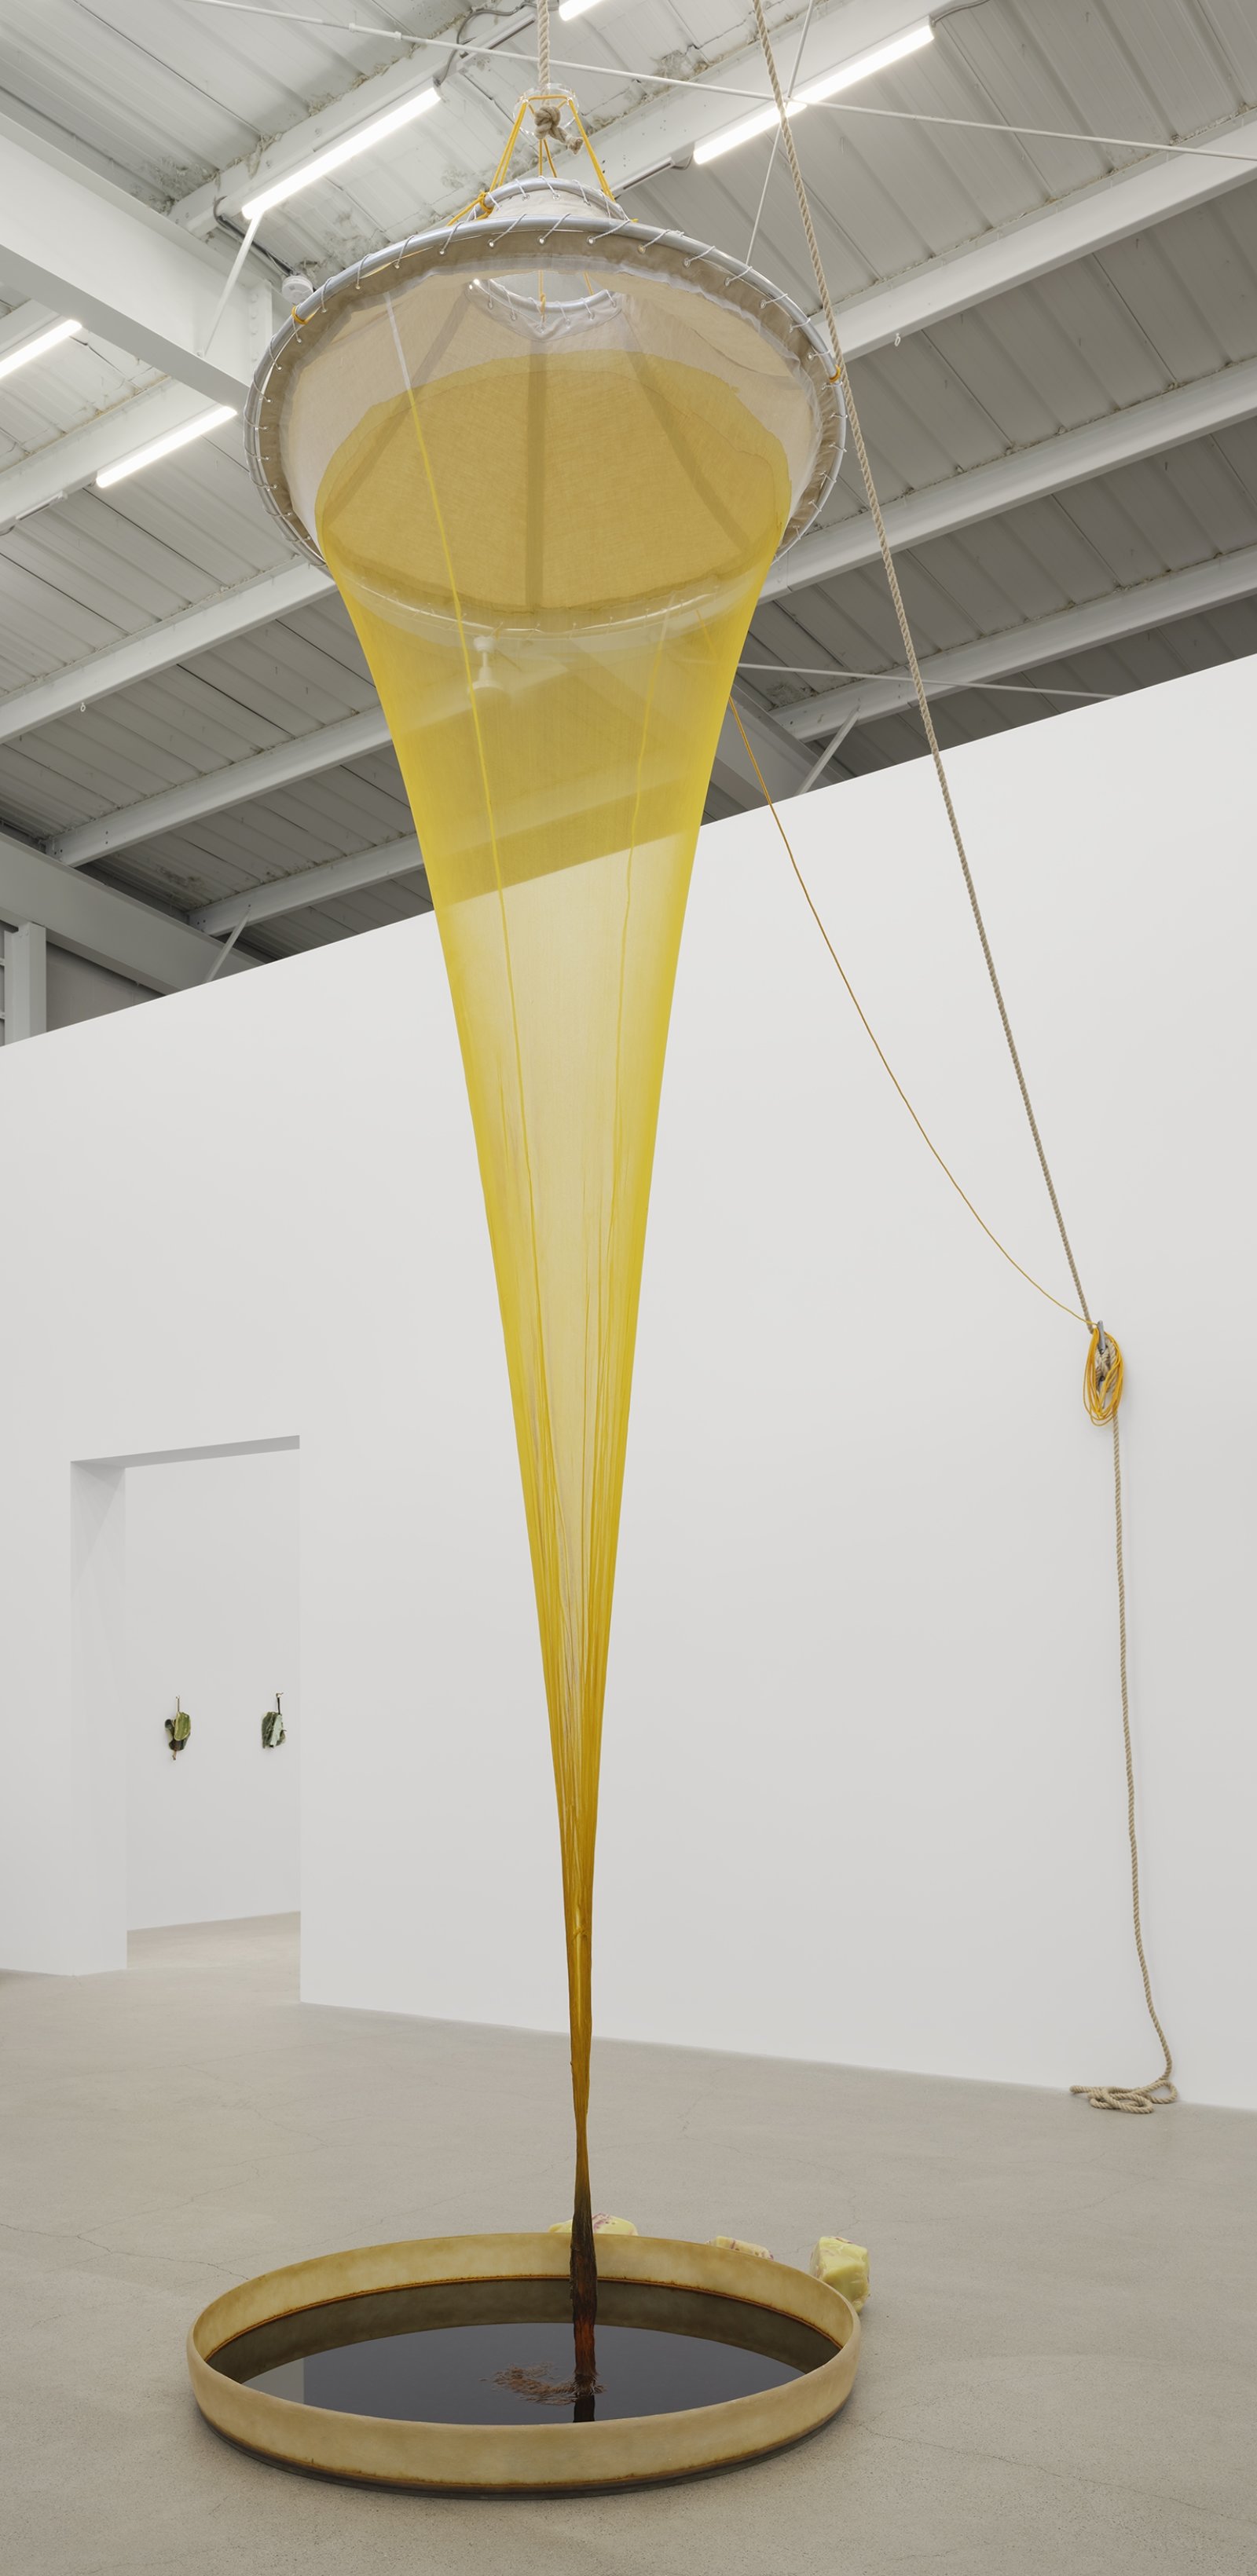 Christina Mackie, Colour Drop, 2014, silk, linen, polyester, aluminum, acrylic, manila, sisal, galvanized steel, fibreglass, gel-coated fibreglass, non-toxic water-based dye, water, worked glass, installation dimensions variable